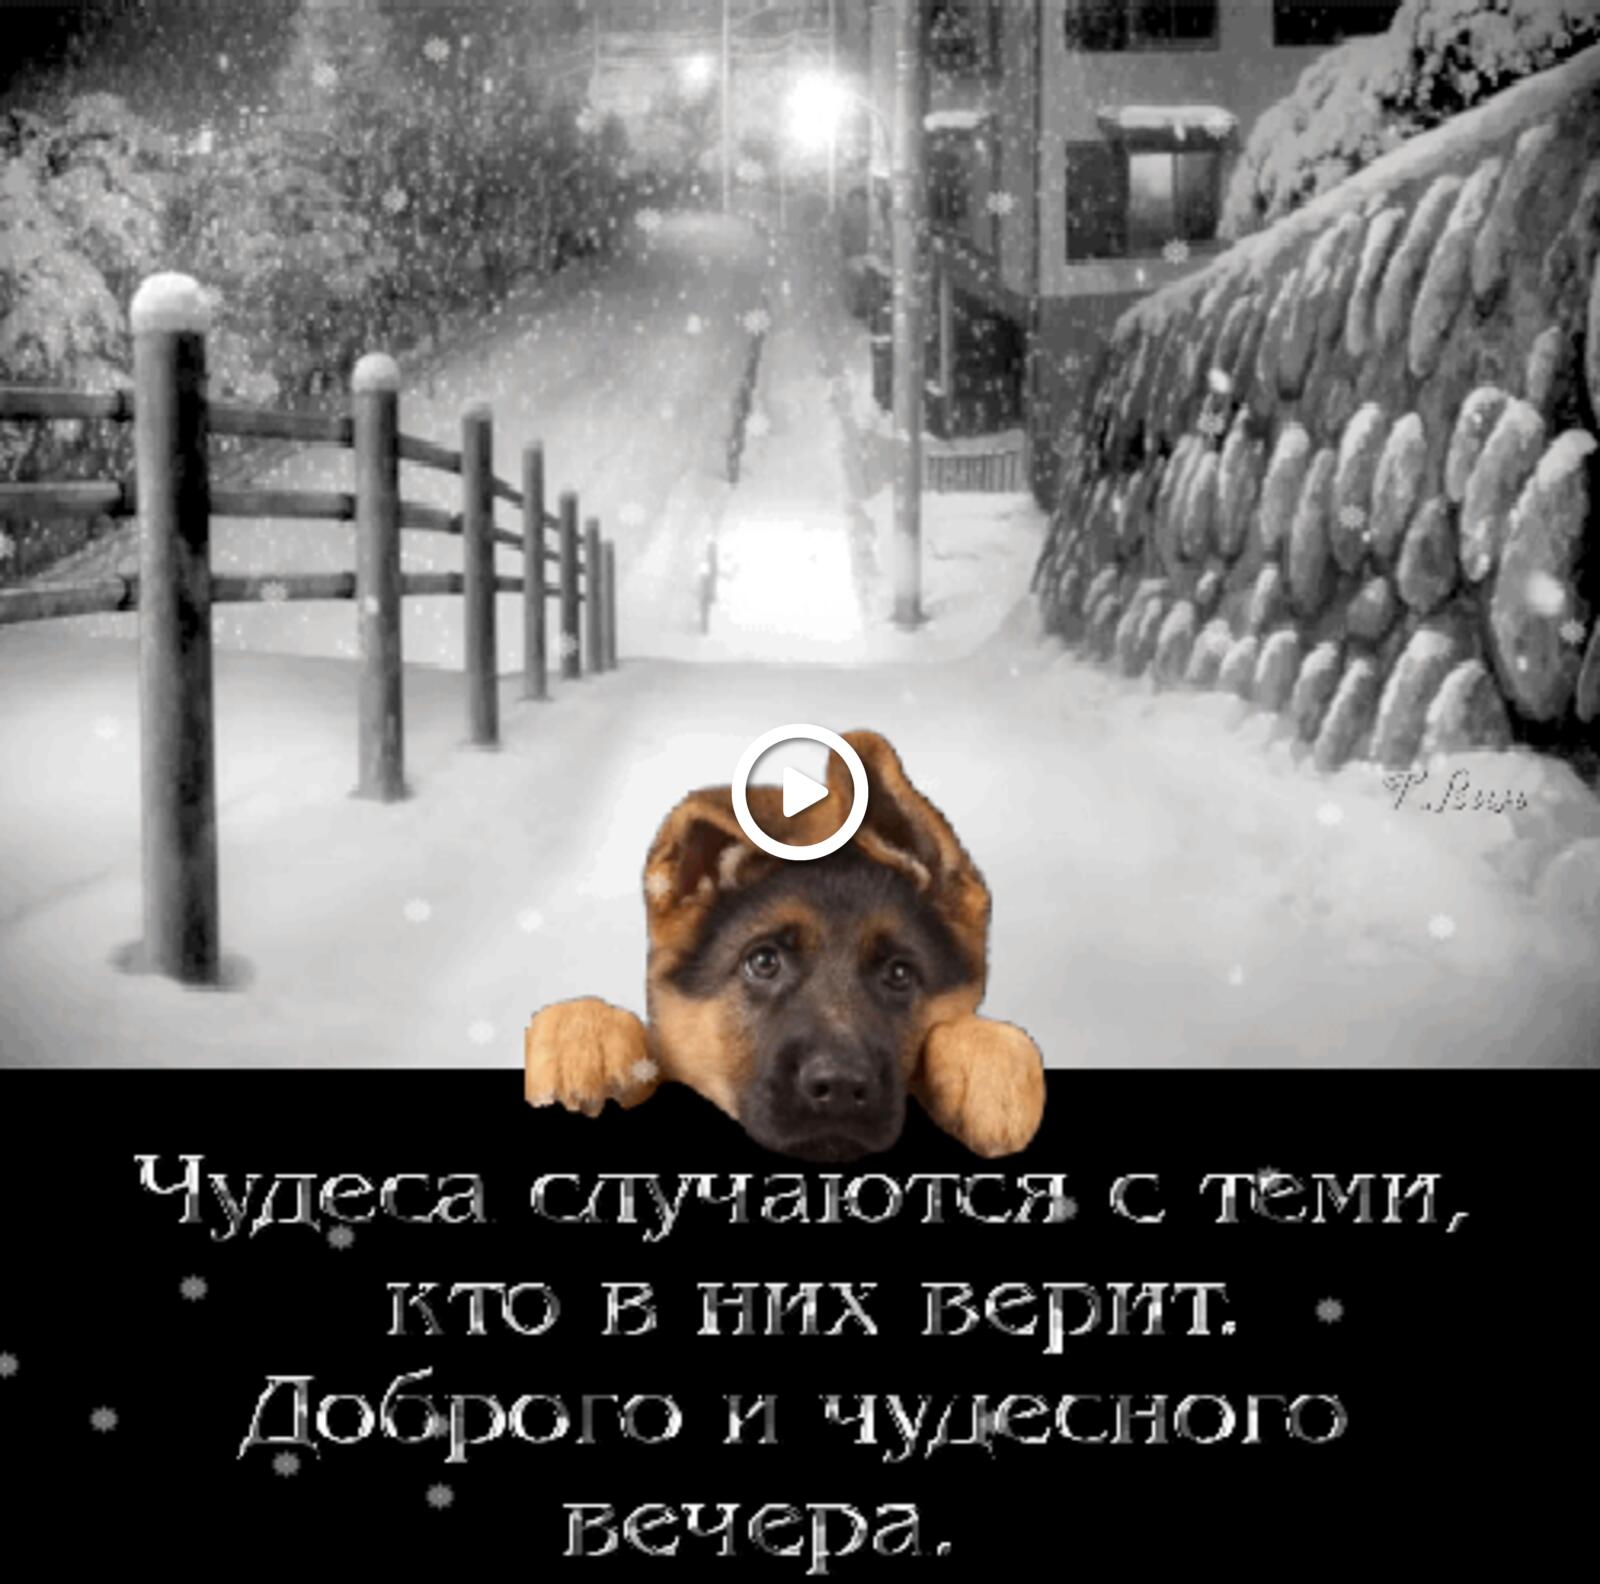 A postcard on the subject of winter evening a dog winter for free